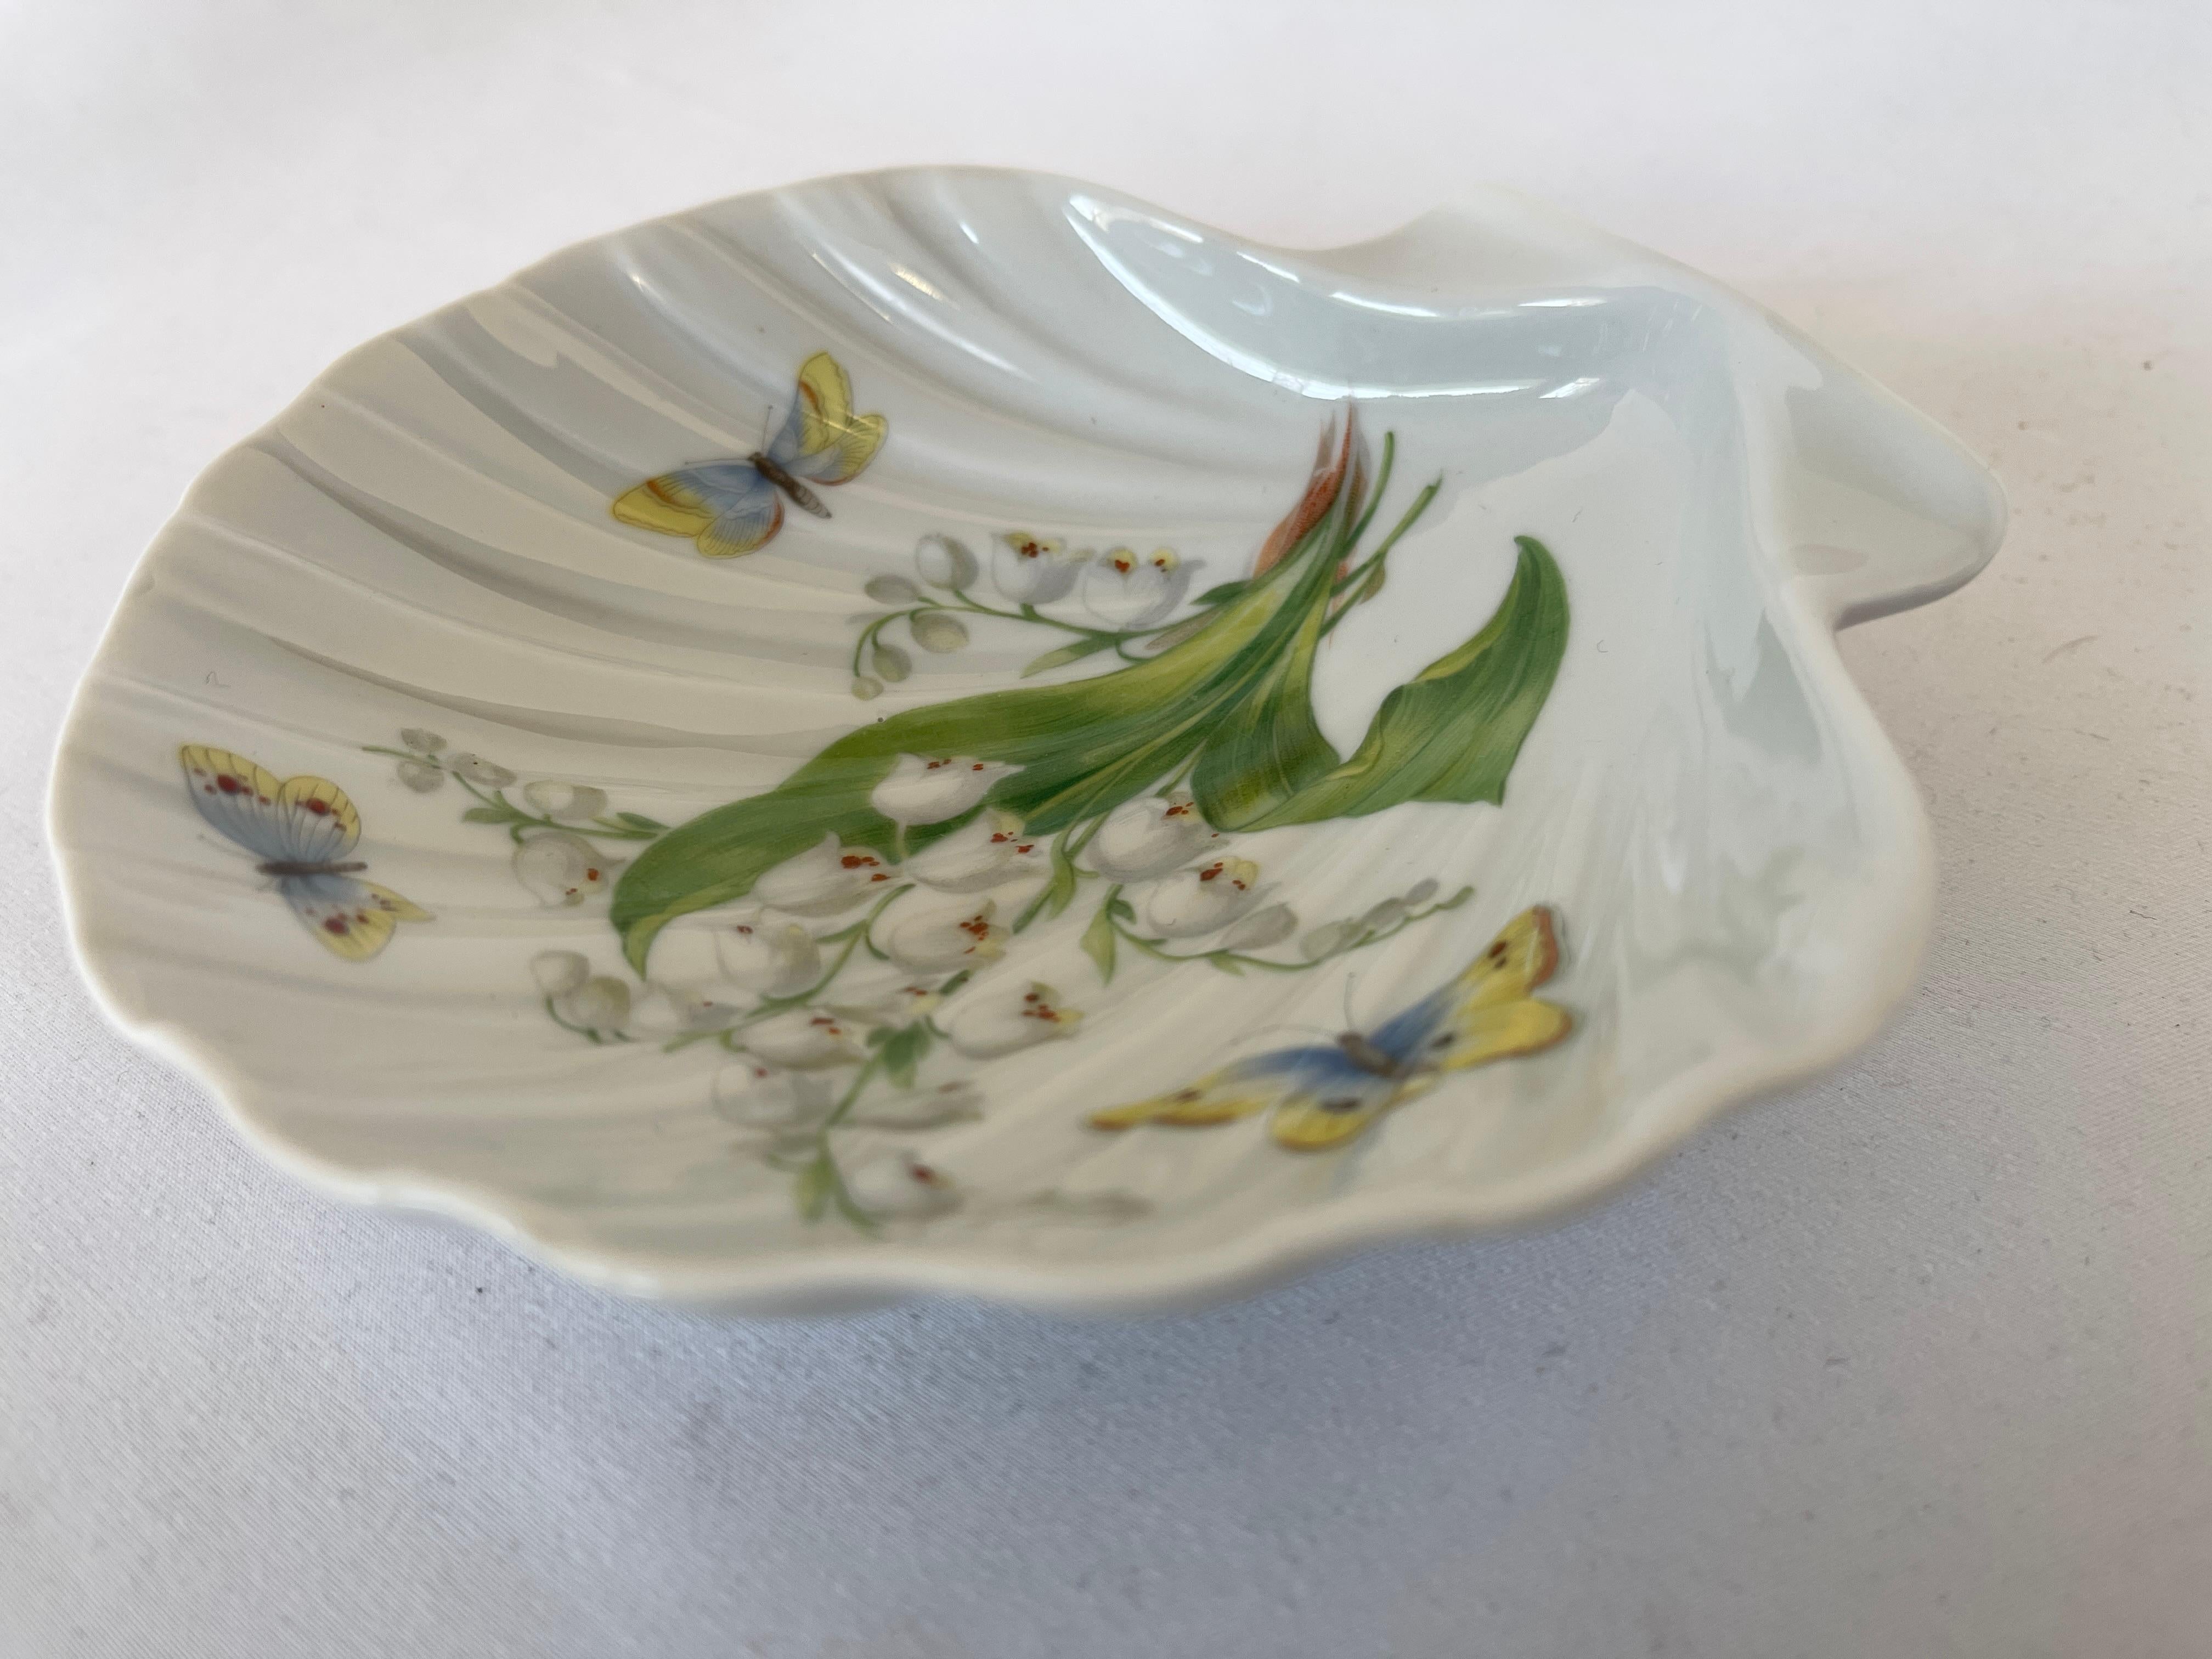 Limoges French Porcelain Sea Shell Dish W/ Hand Painted Lily-of-The-Valley Motif For Sale 1